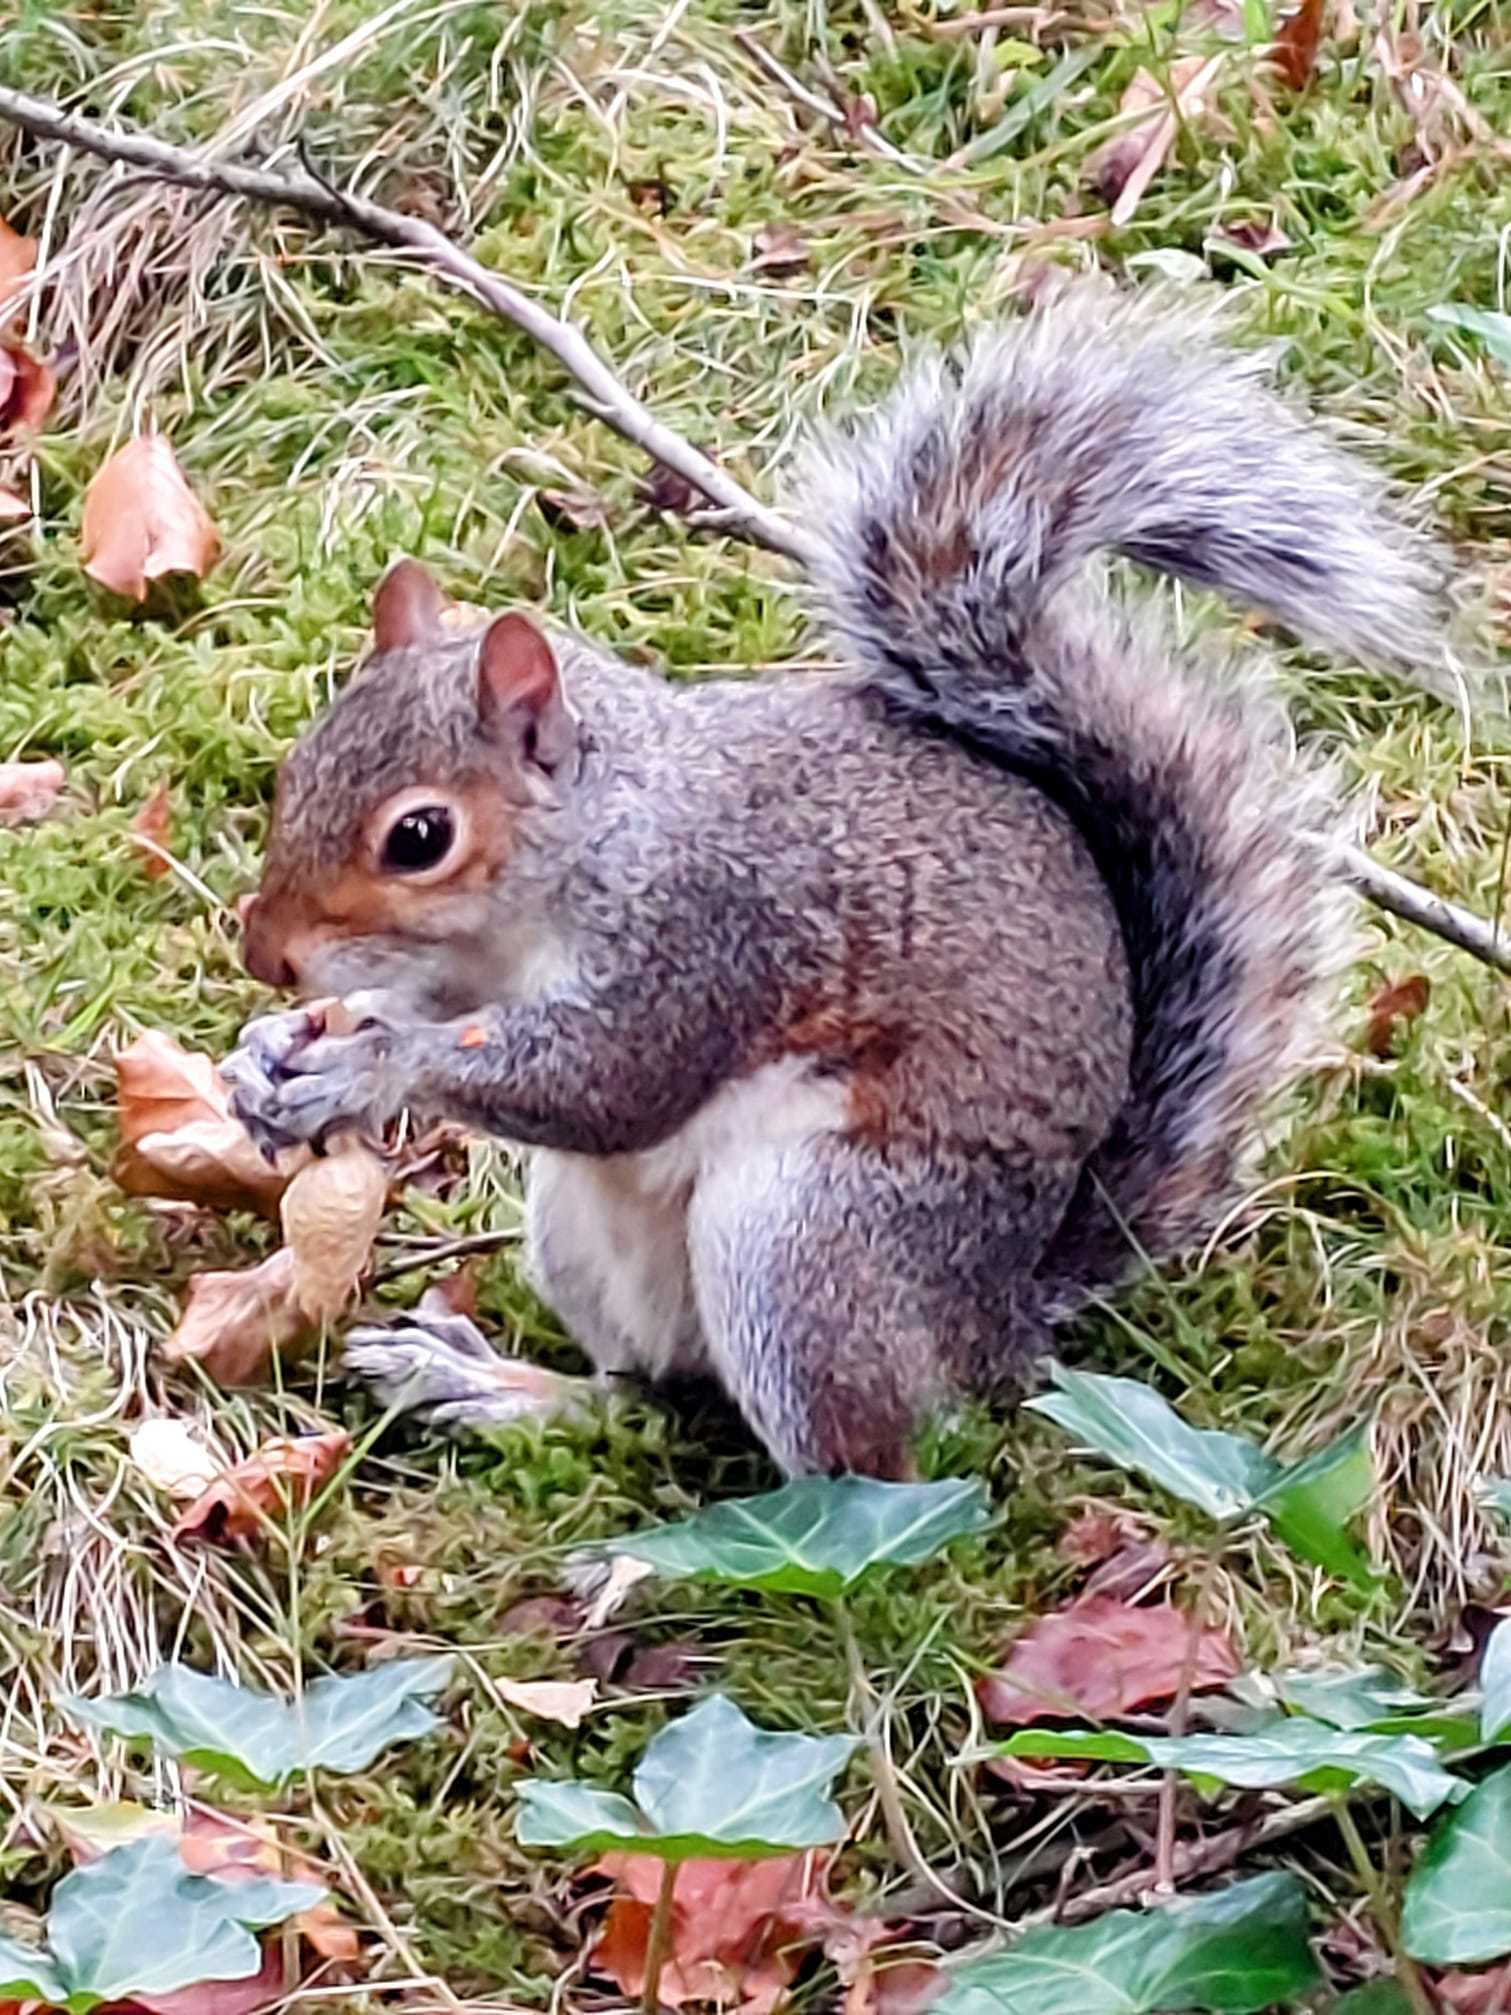 Collecting nuts in Birkenhead Park by Julie Longshaw